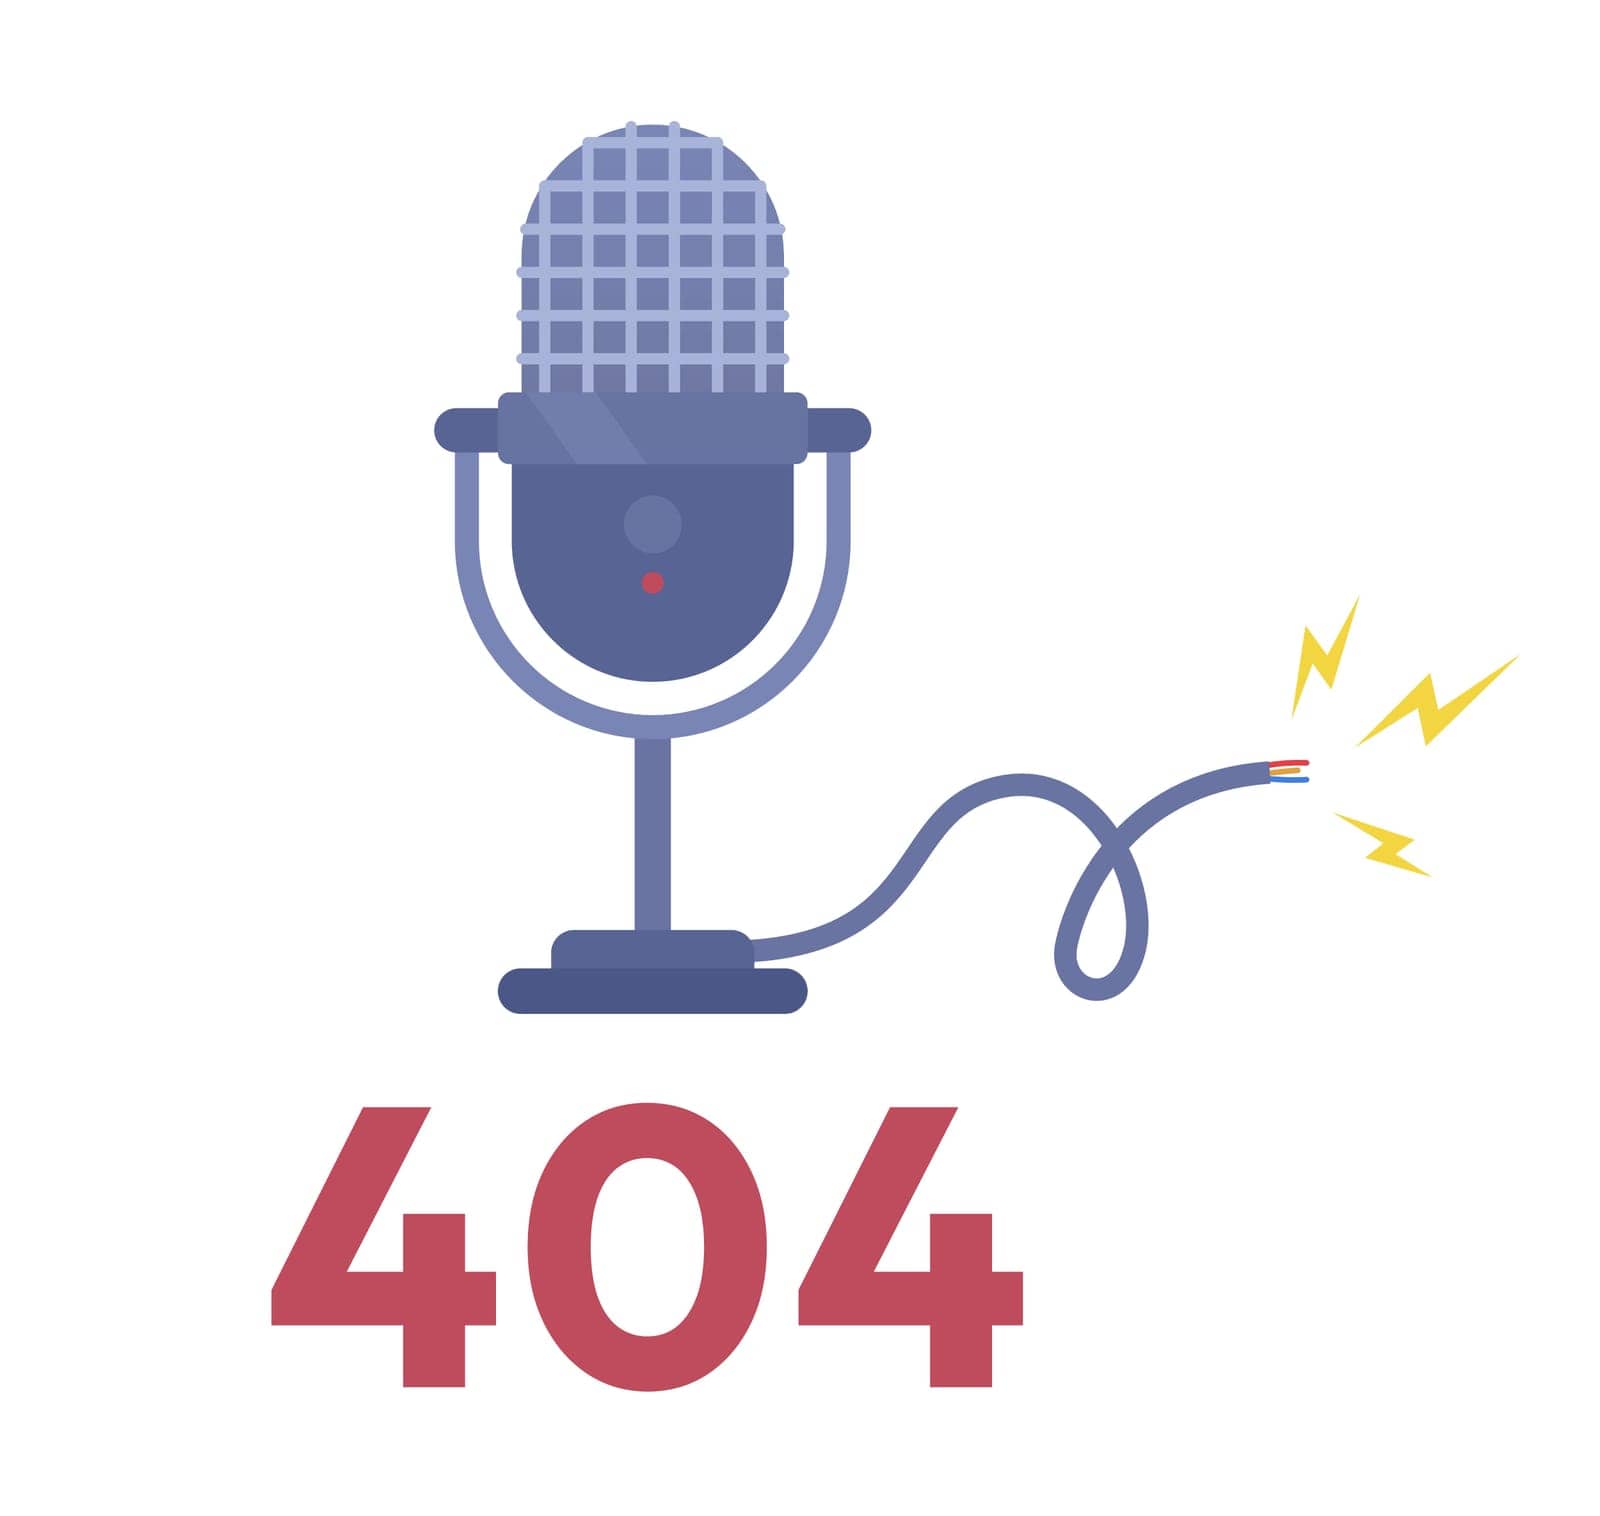 Microphone damage 404 page not found illustration by ntl